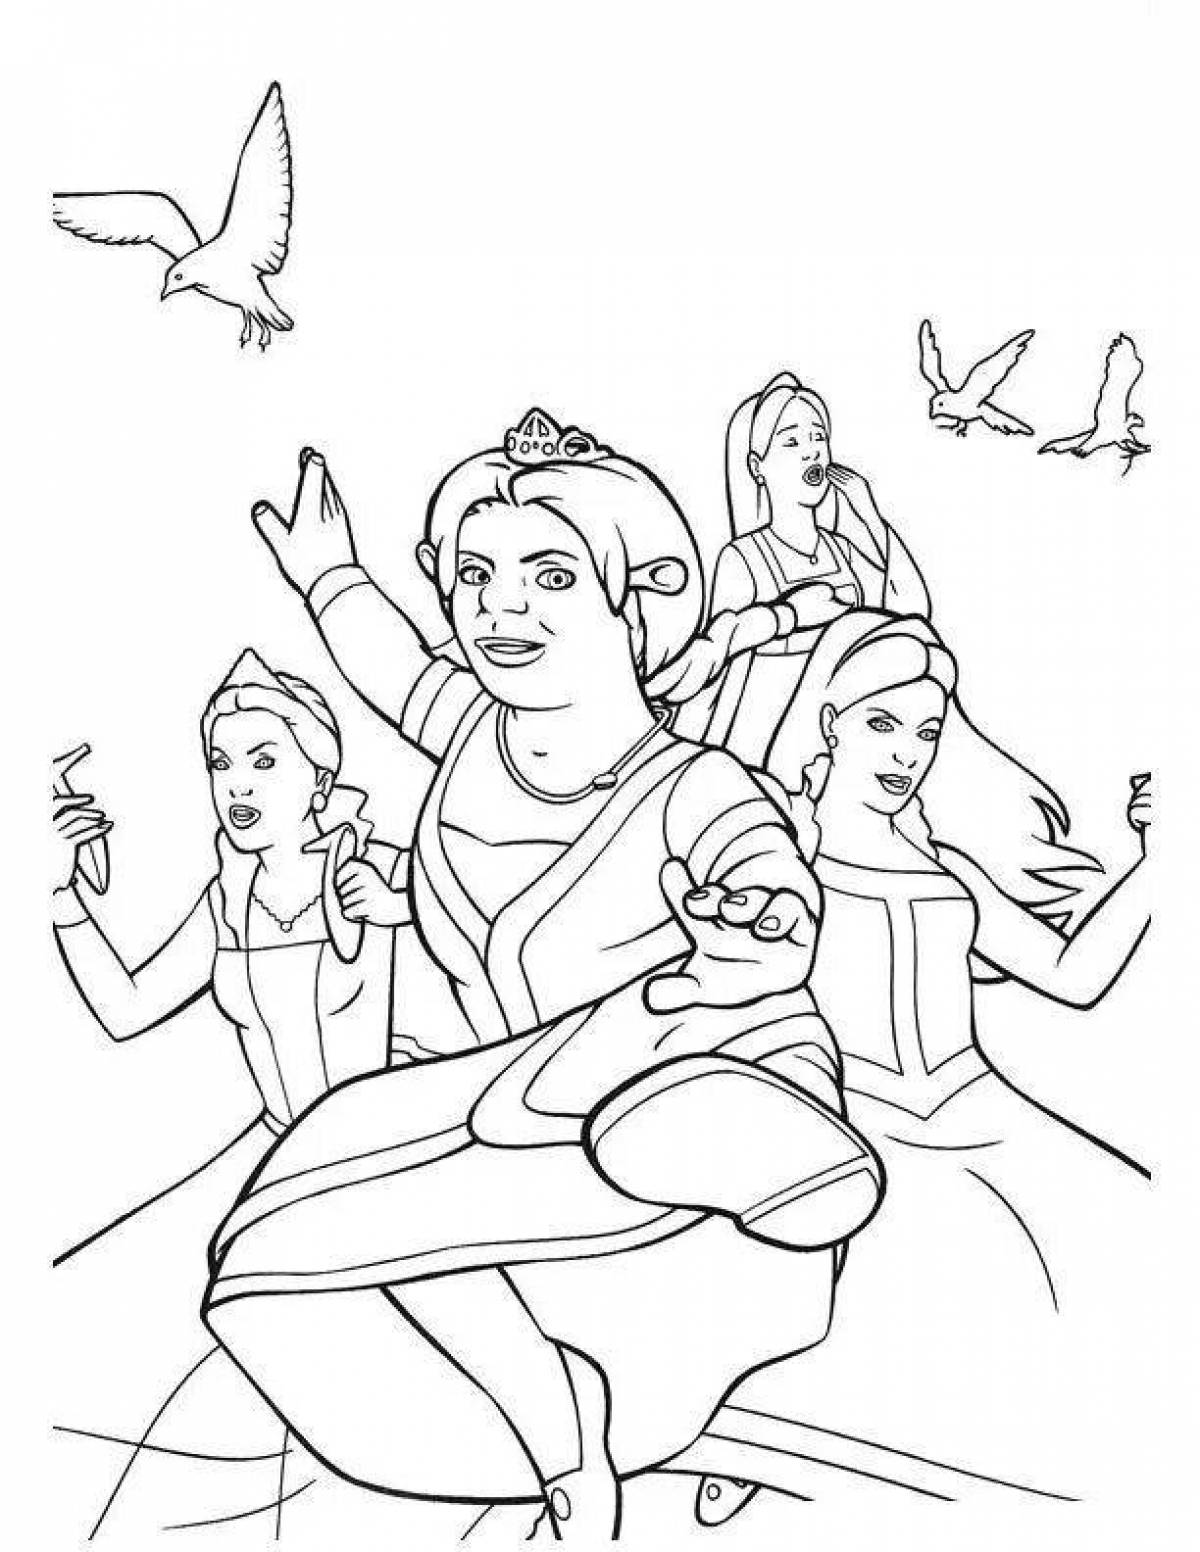 Fiona's jubilant coloring page